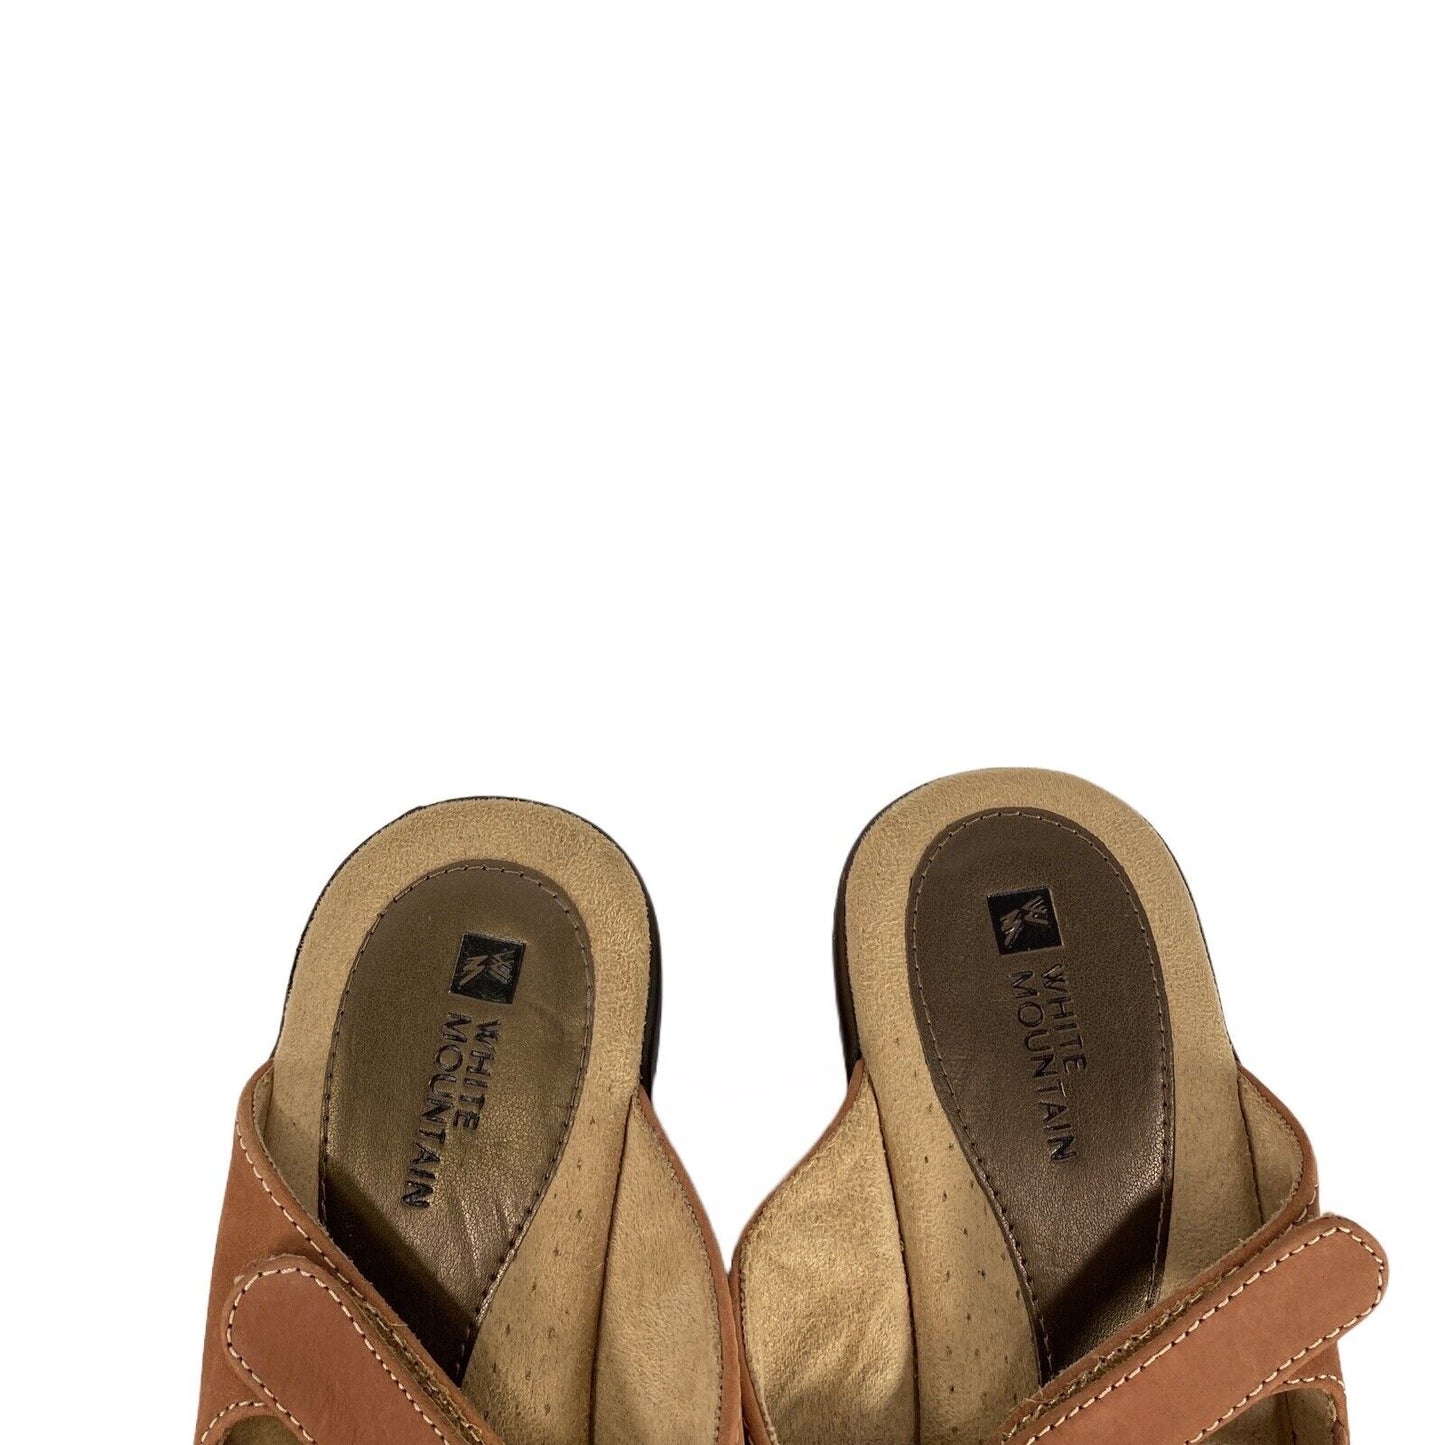 White Mountain Women's Brown Fabric Strappy Wedge Sandals - 9.5 M